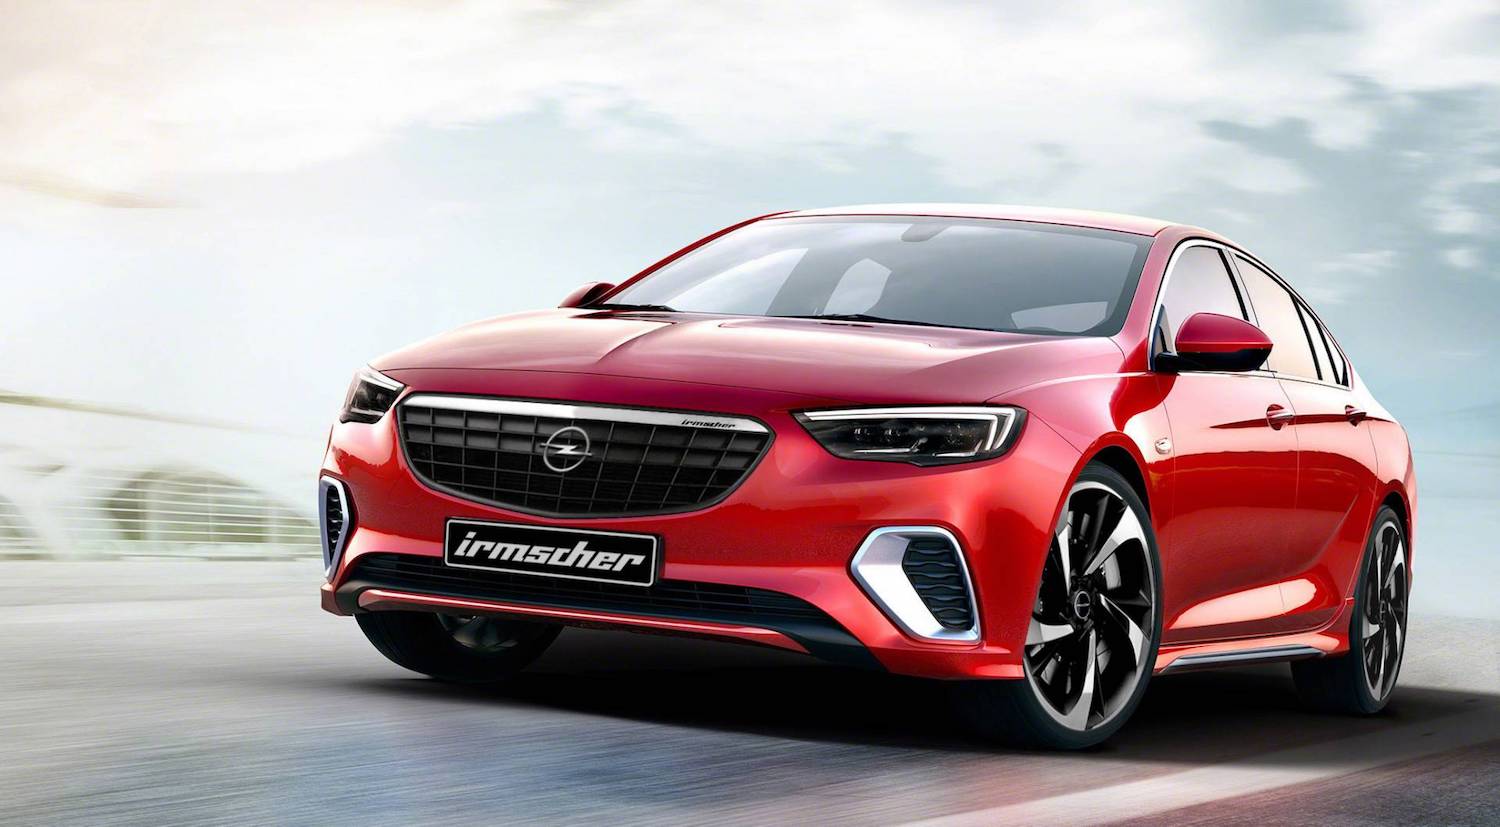 steam ore Encommium Opel Insignia GSi Gains Power And Style Courtesy Of Irmscher | GM Authority